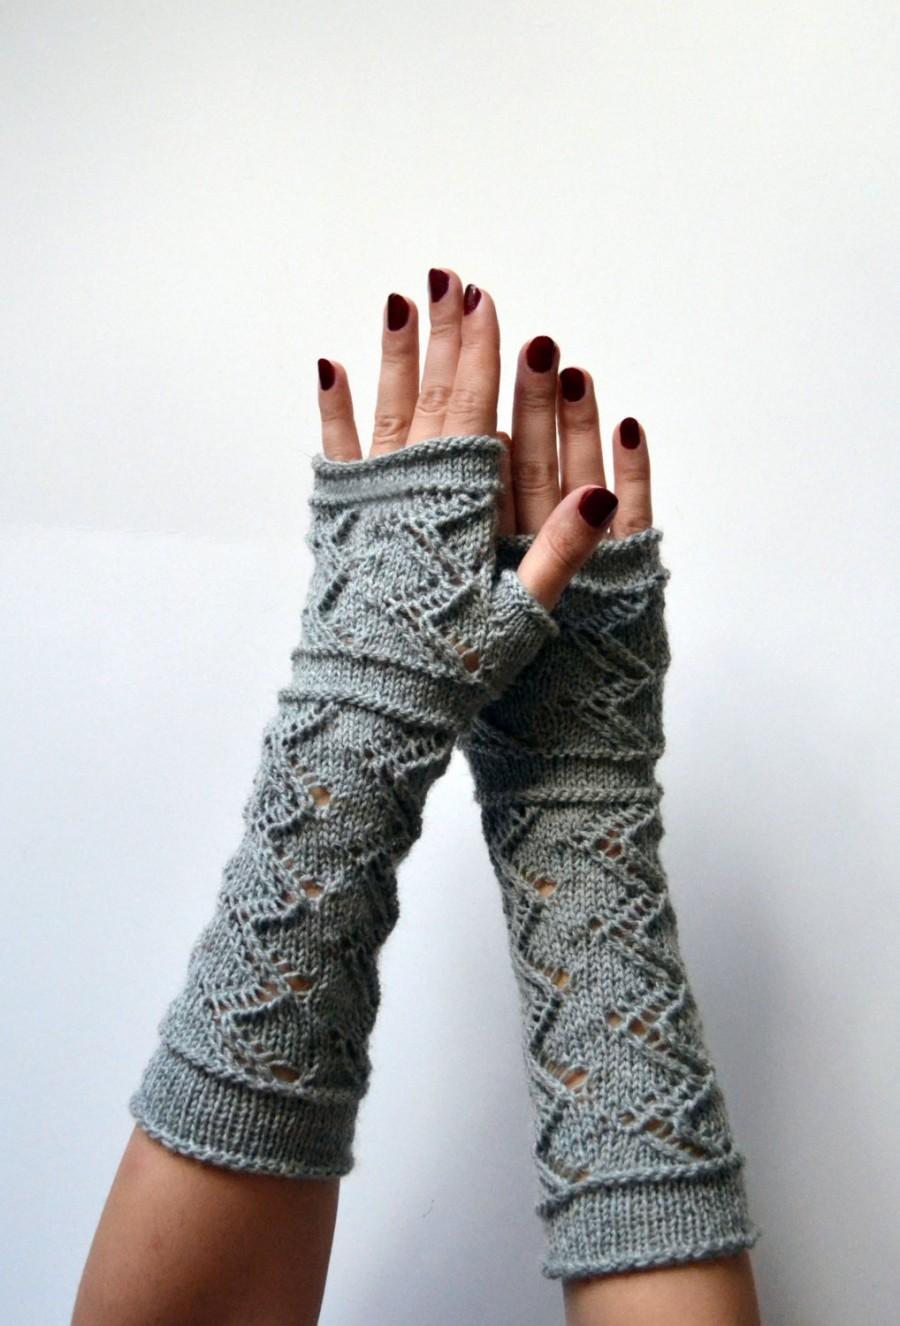 Hochzeit - Gray Lace Knit Fingerless Gloves - Lace Fingerless Gloves - Winter Gloves - Gray Lace Gloves - Luxurious Christmas Gift nO 101.